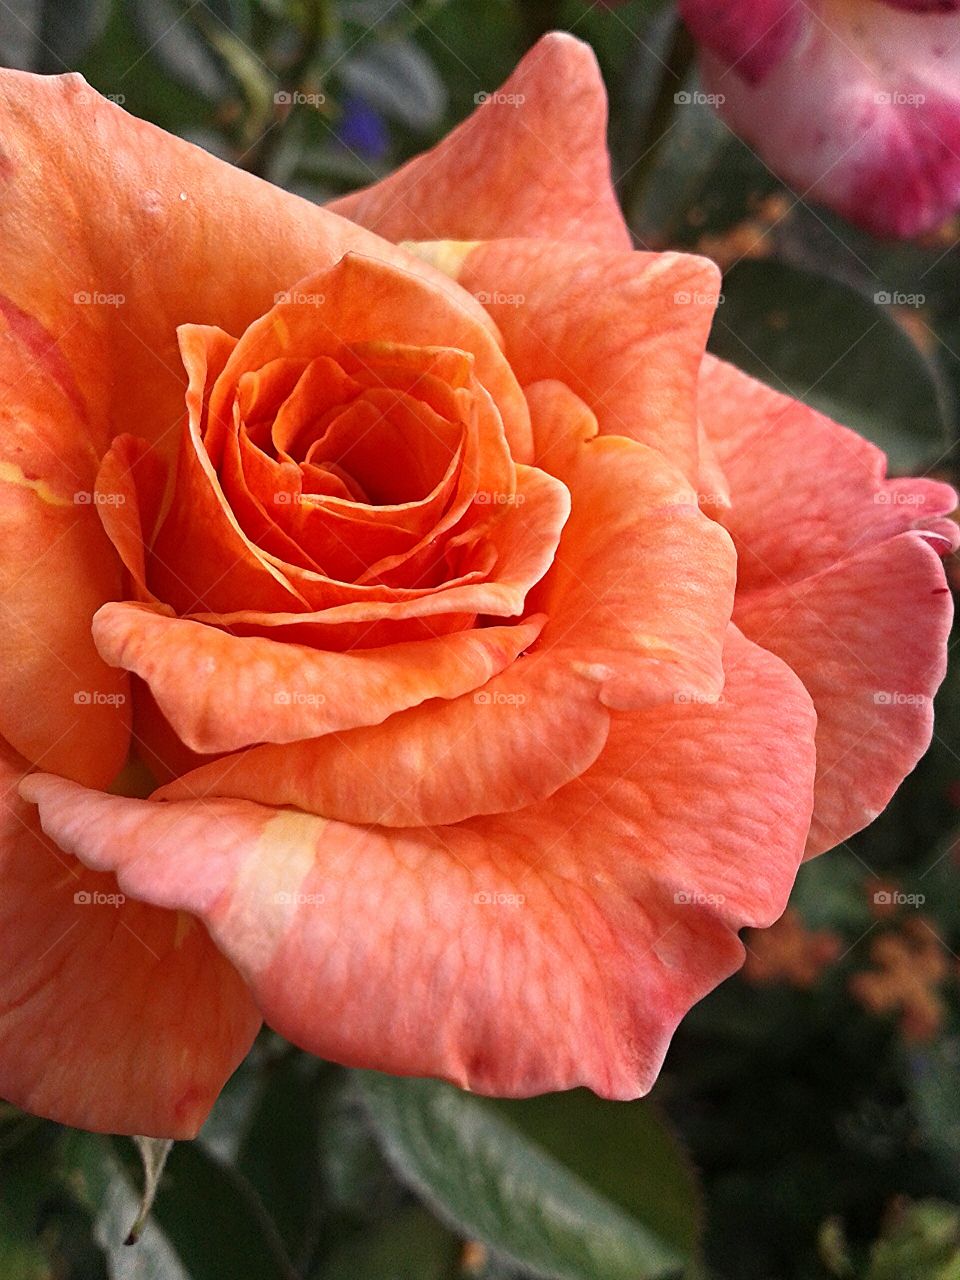 Summer heat. Hot color for a rose.